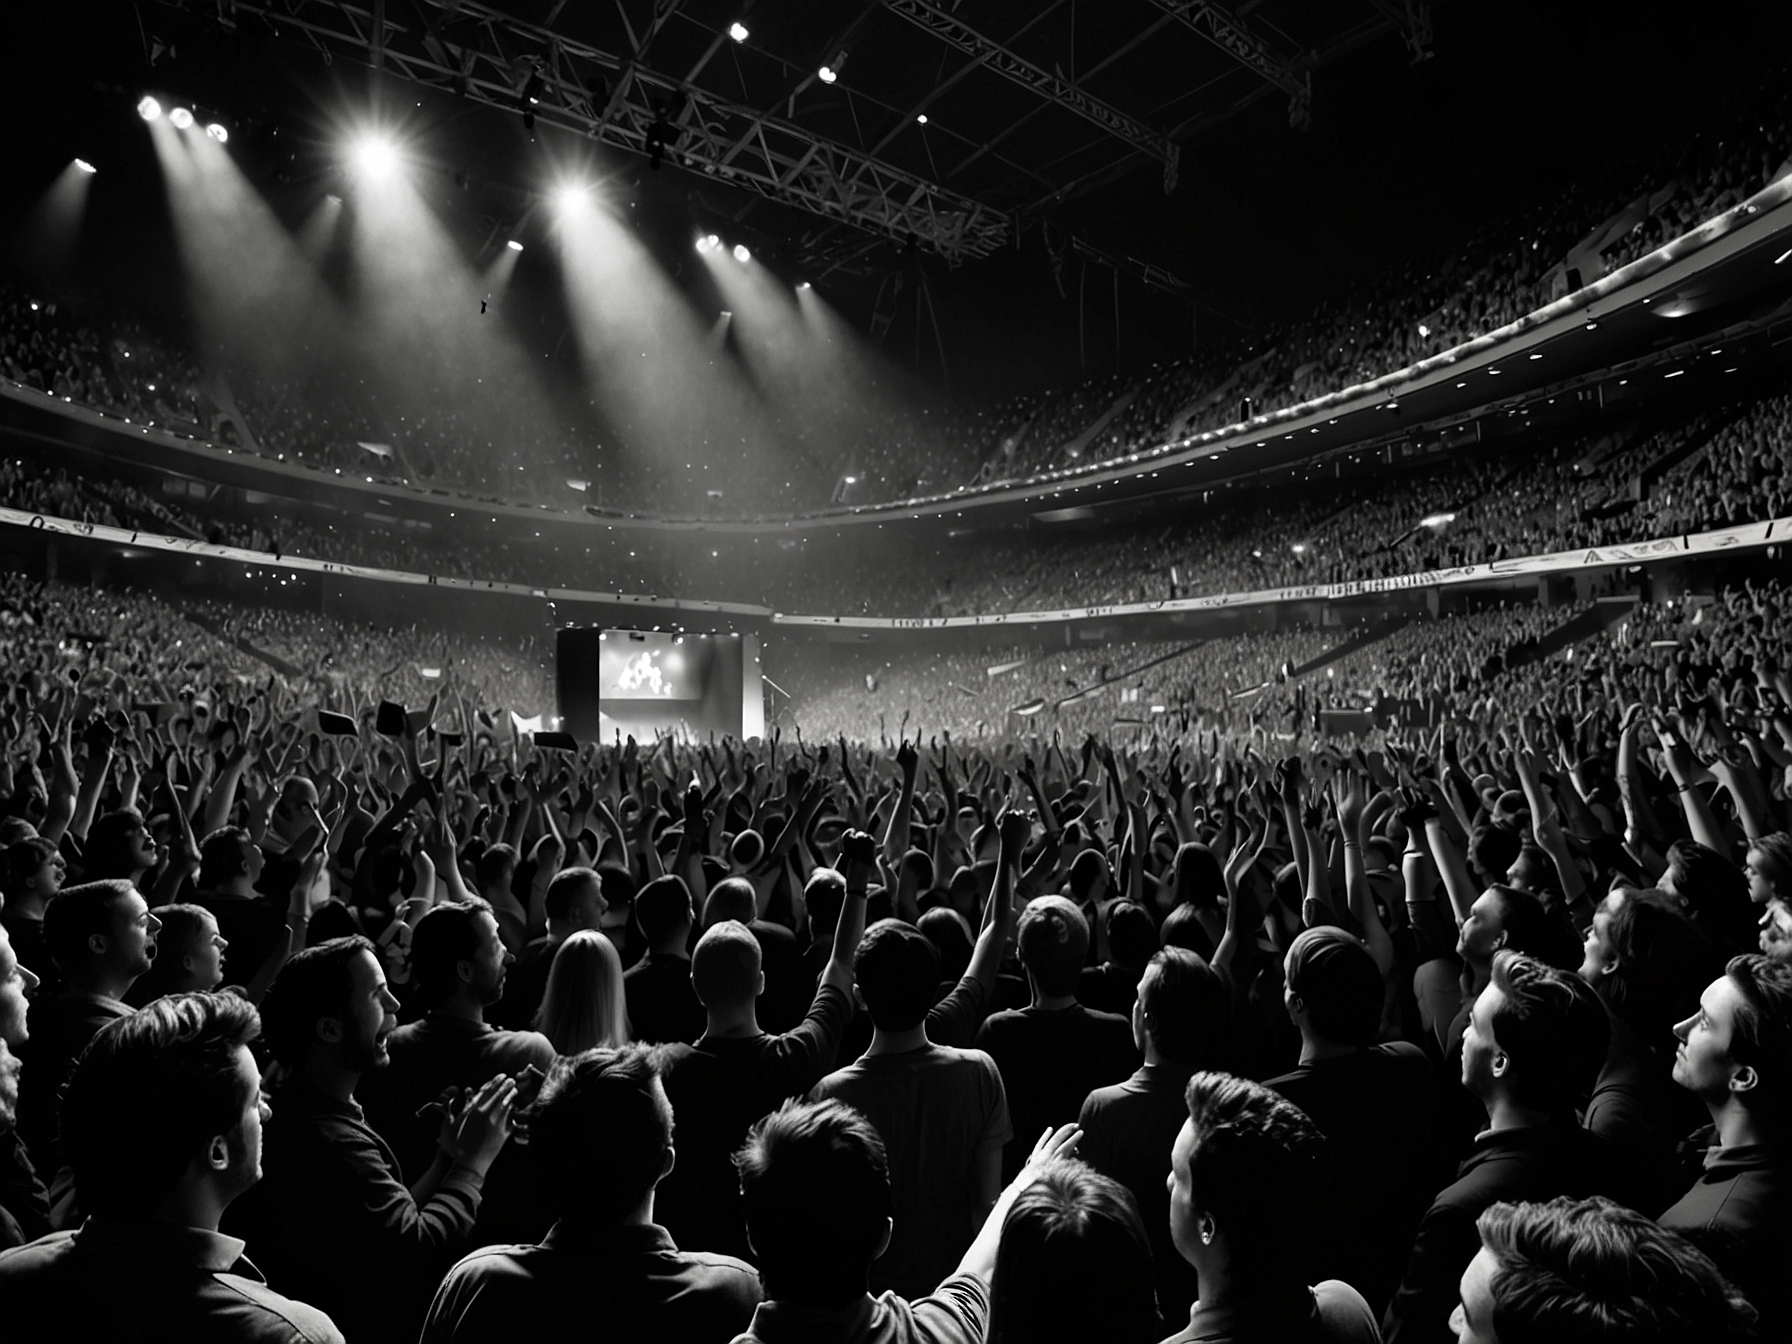 The packed crowd at Dublin's 3Arena, cheering and singing along as Pearl Jam performs their classic hits such as 'Alive' and 'Jeremy,' creating an electrifying atmosphere.